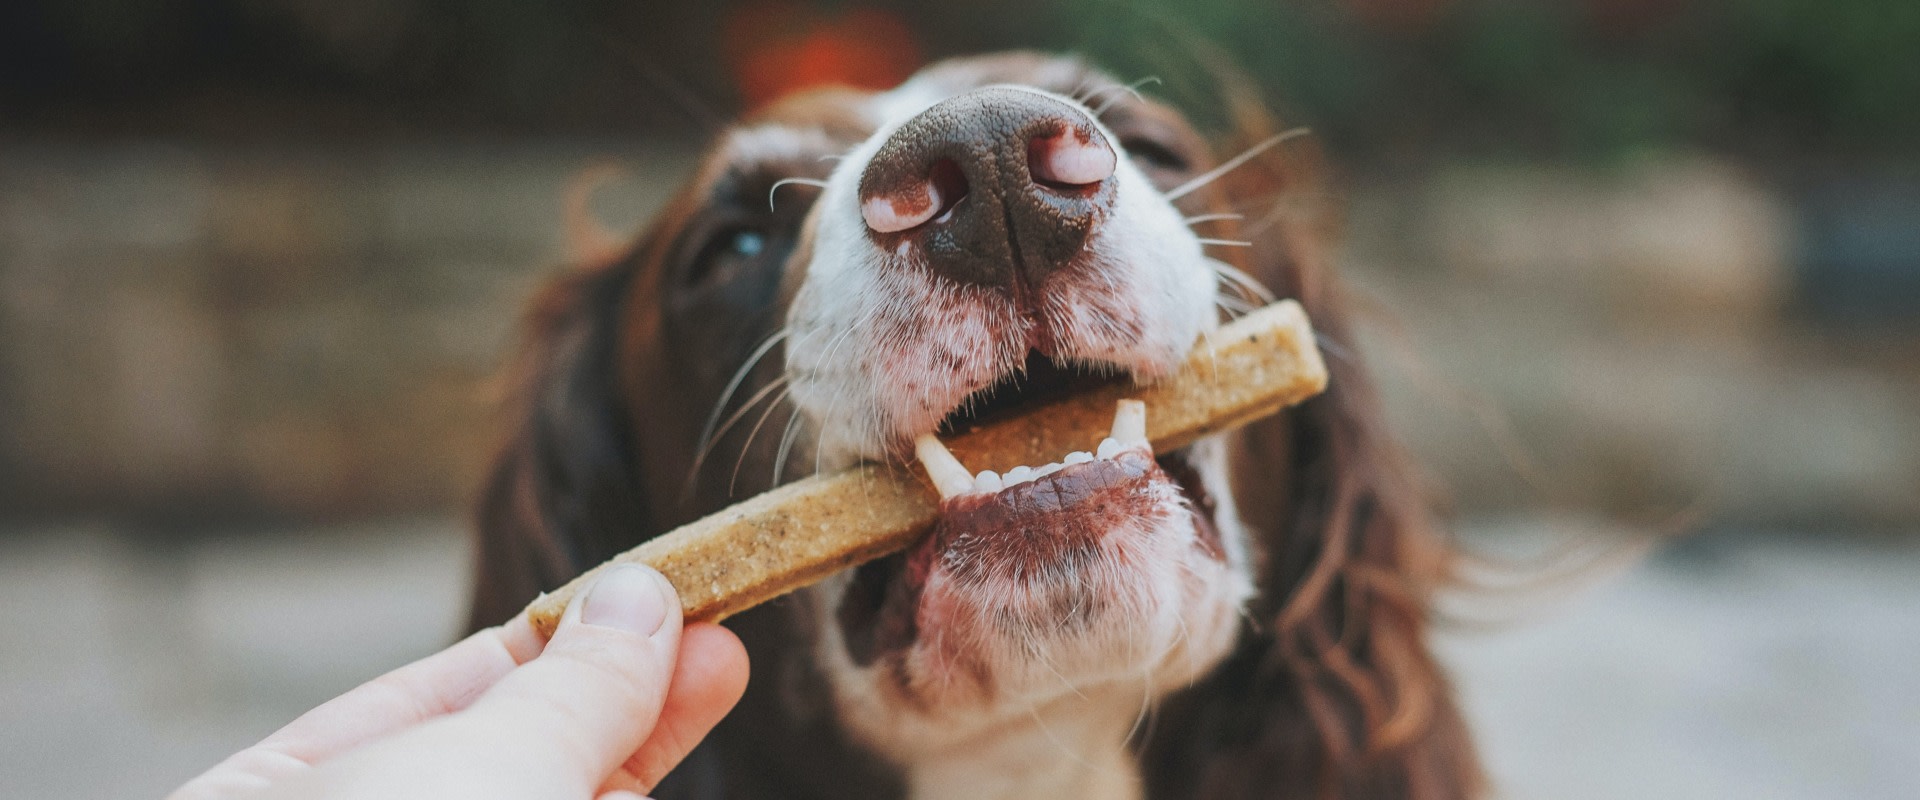 How Do You Make Dog Treats from Scratch? Homemade Dog Treat Recipes Your Pup Will Love